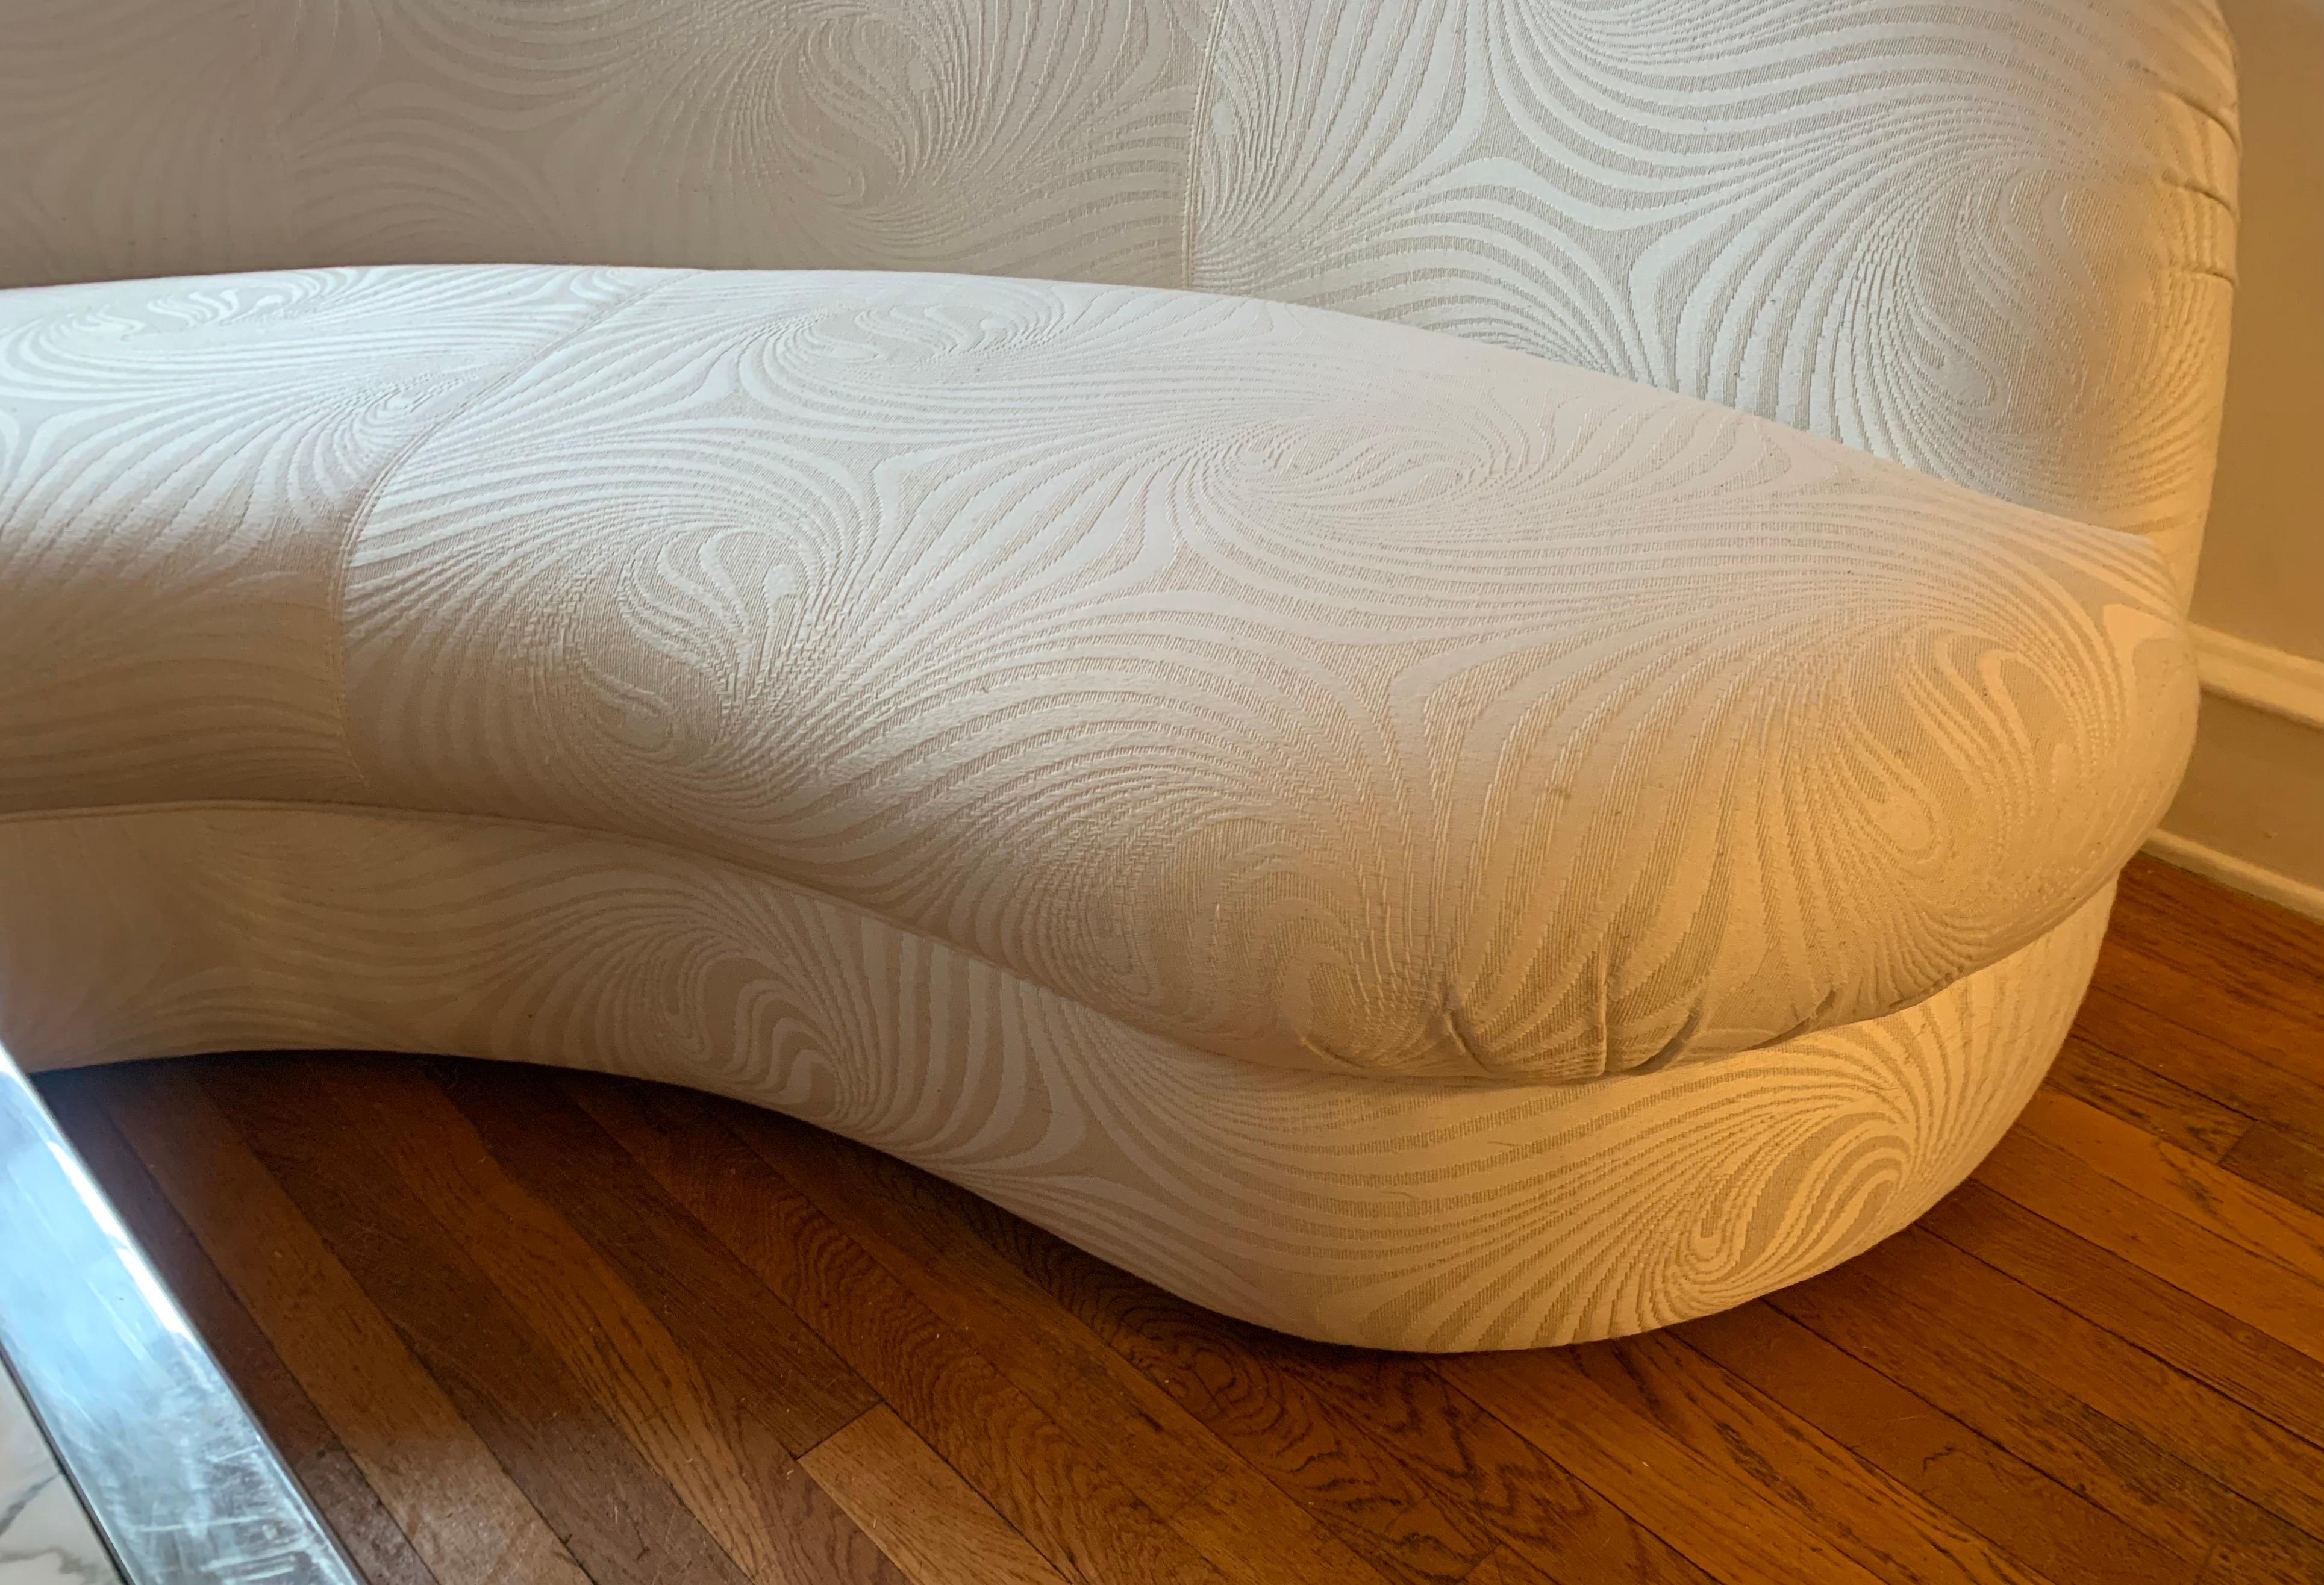 Who doesn't love a crisp white crescent sofa?

This pair of sofas was kept in the formal sitting room of a 1990's home, and they saw little use.

The upholstery is in good condition with no re-upholstery needed.

While this is absolutely in the